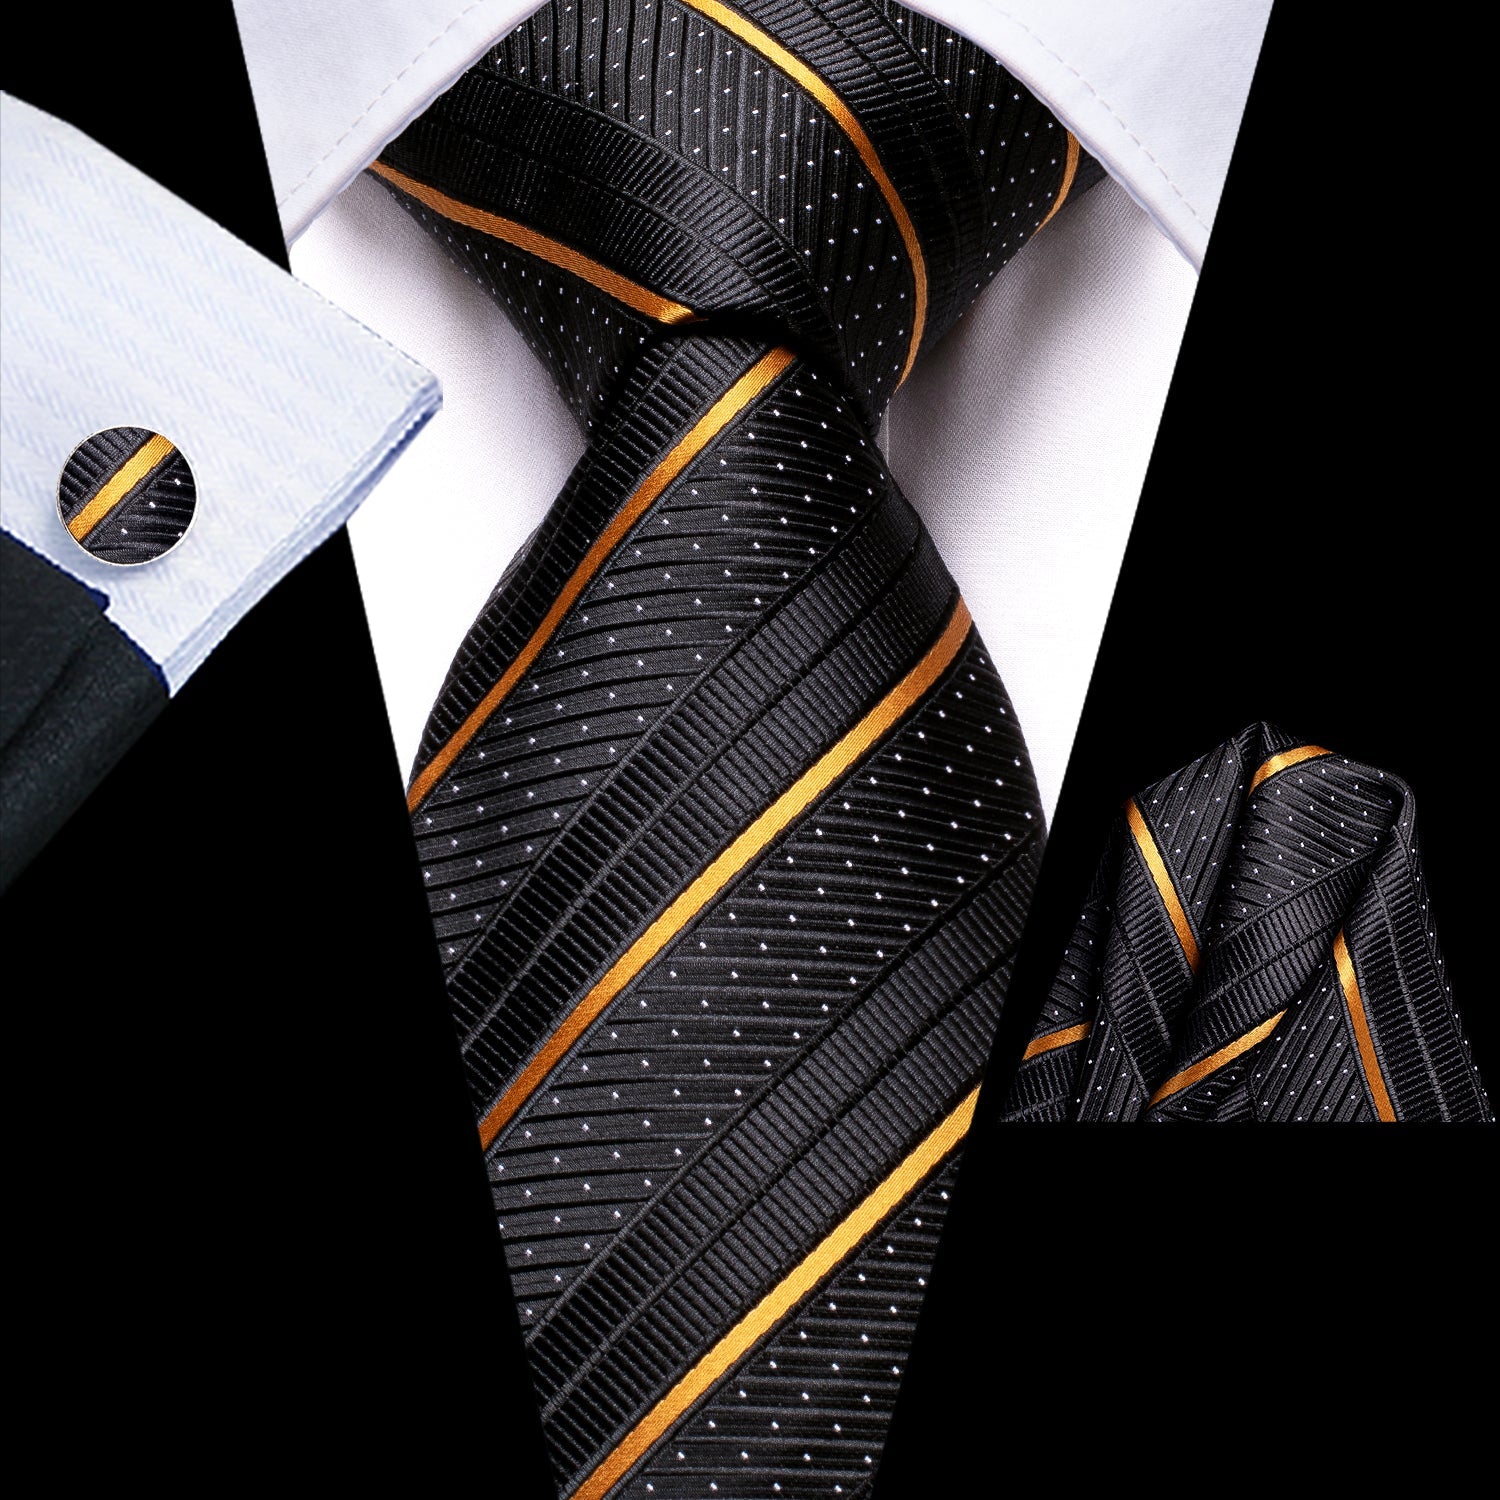 New Black Golden Striped 70 Inches Extra Long Novelty Tie Pocket Square Cufflinks Set